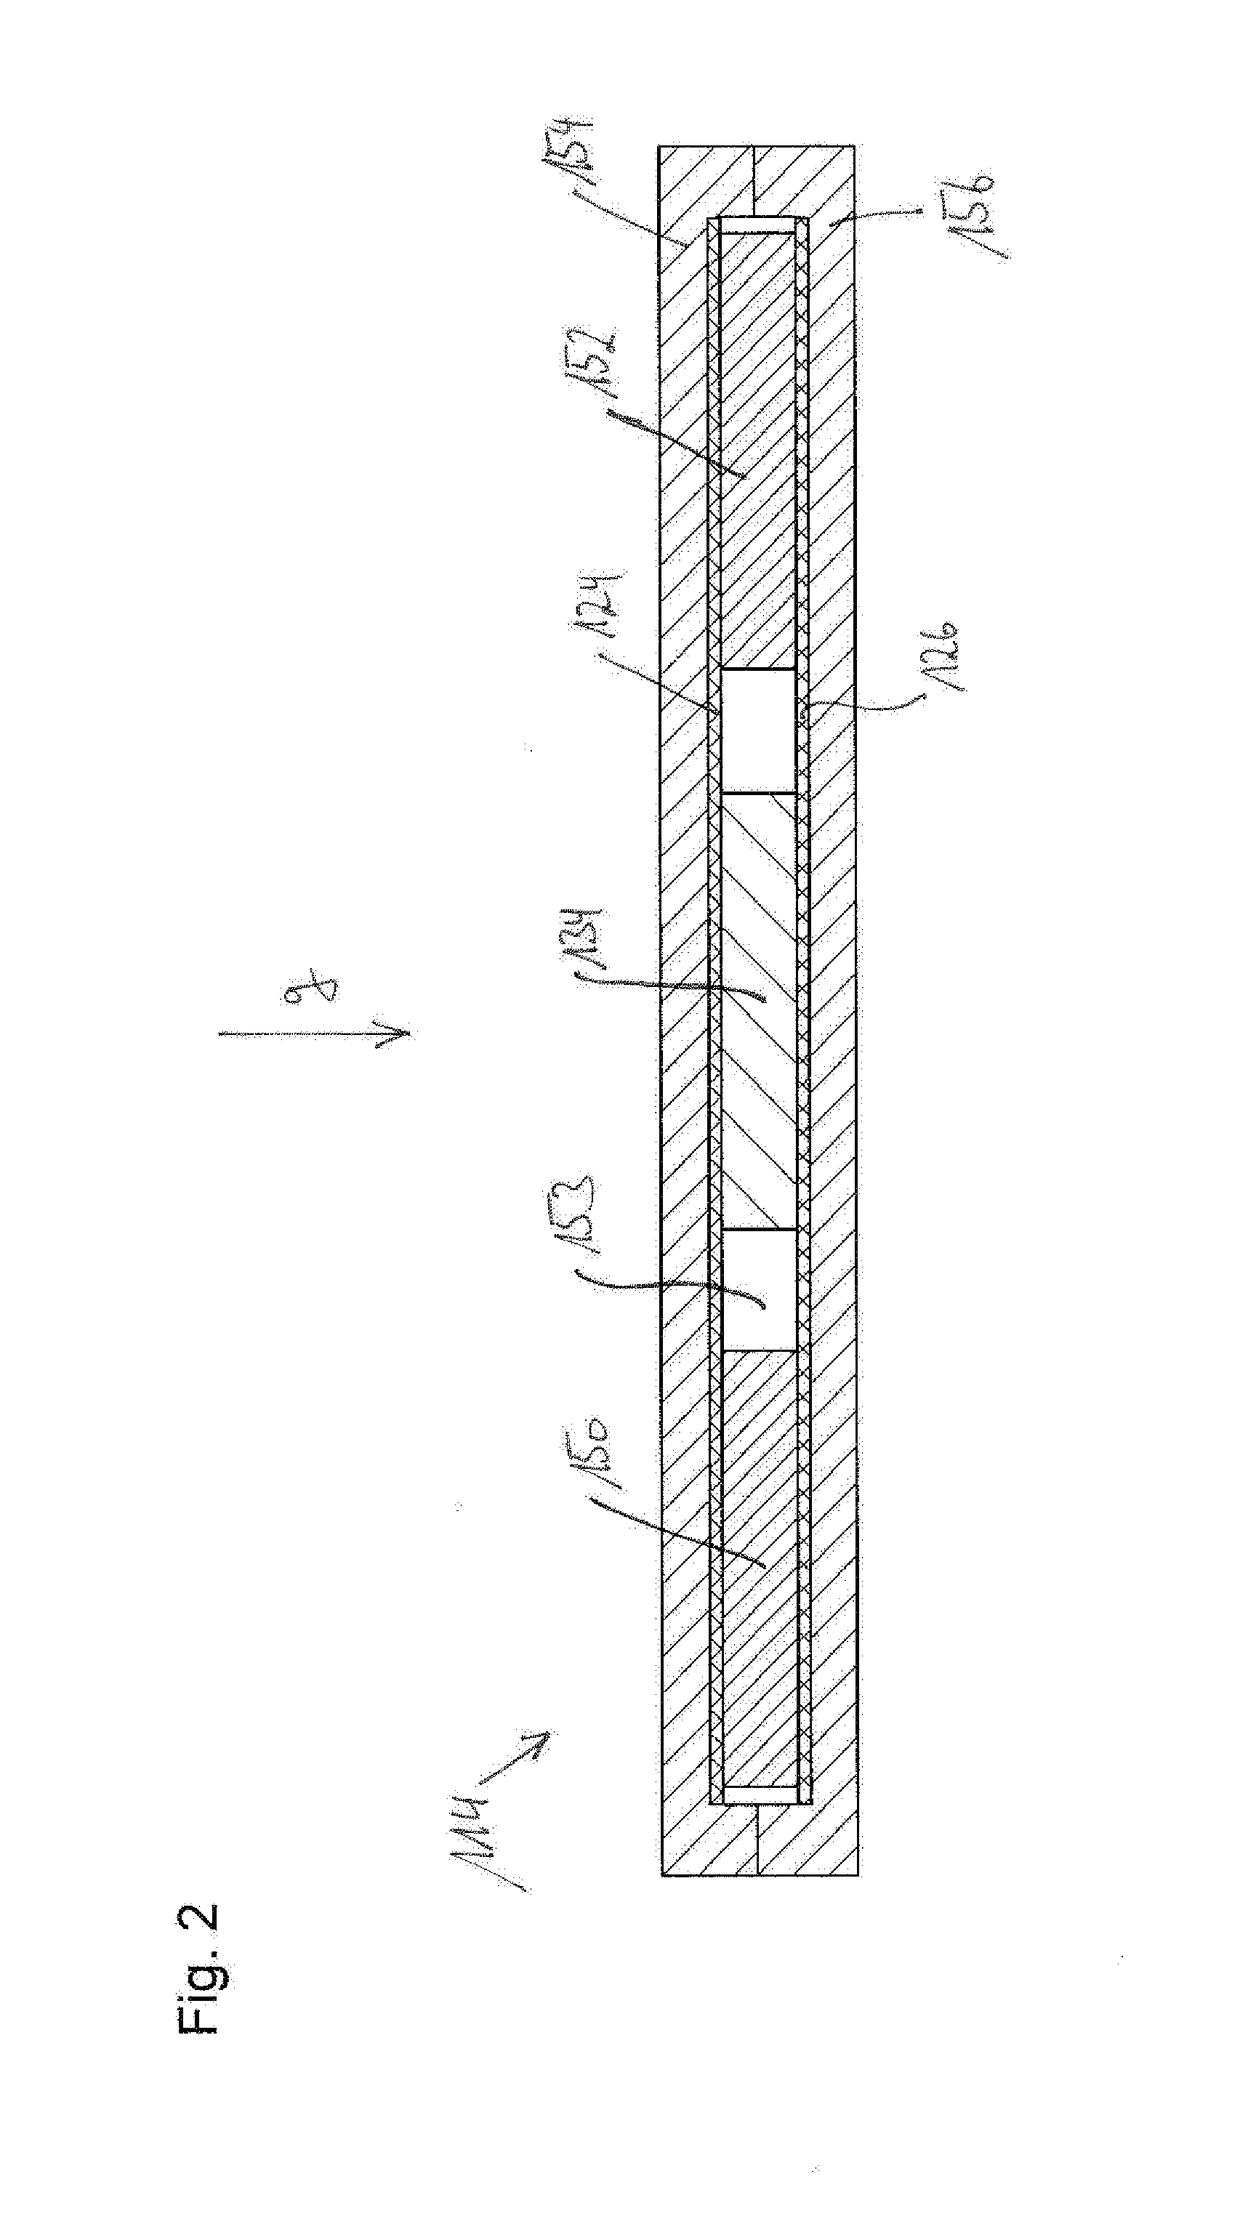 Electrical heating device with PTC element and electrical supply lines as heat conductor and operating fluid tank with such a heating device